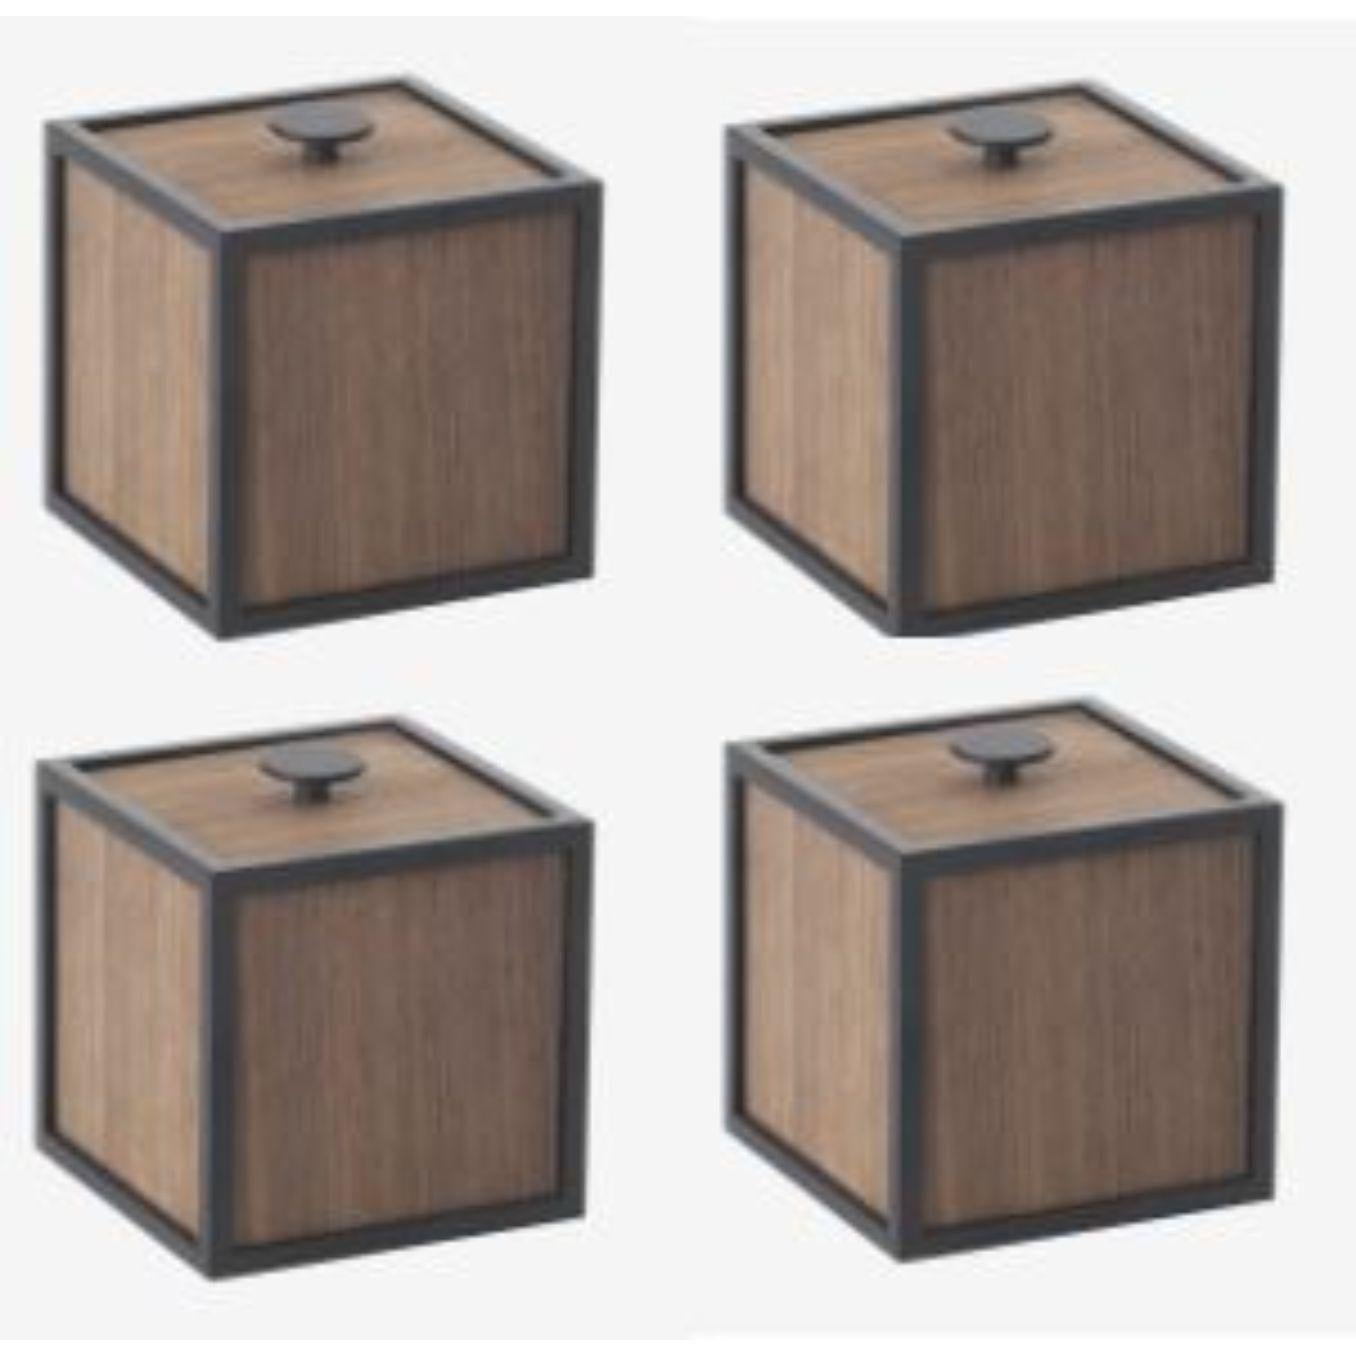 Set of 4 smoked oak frame 10 box by Lassen
Dimensions: d 10 x w 10 x h 10 cm 
Materials: Finér, Melamin, Melamine, Metal, Veneer
Weight: 0.85 Kg

Frame box is a square box in a cubistic shape. The simple boxes are inspired by the Kubus